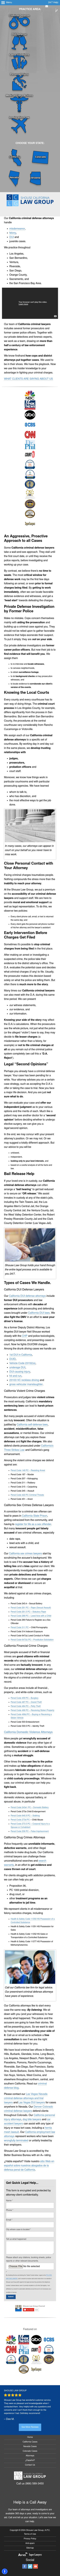 Shouse Law Group - Torrance CA Lawyers